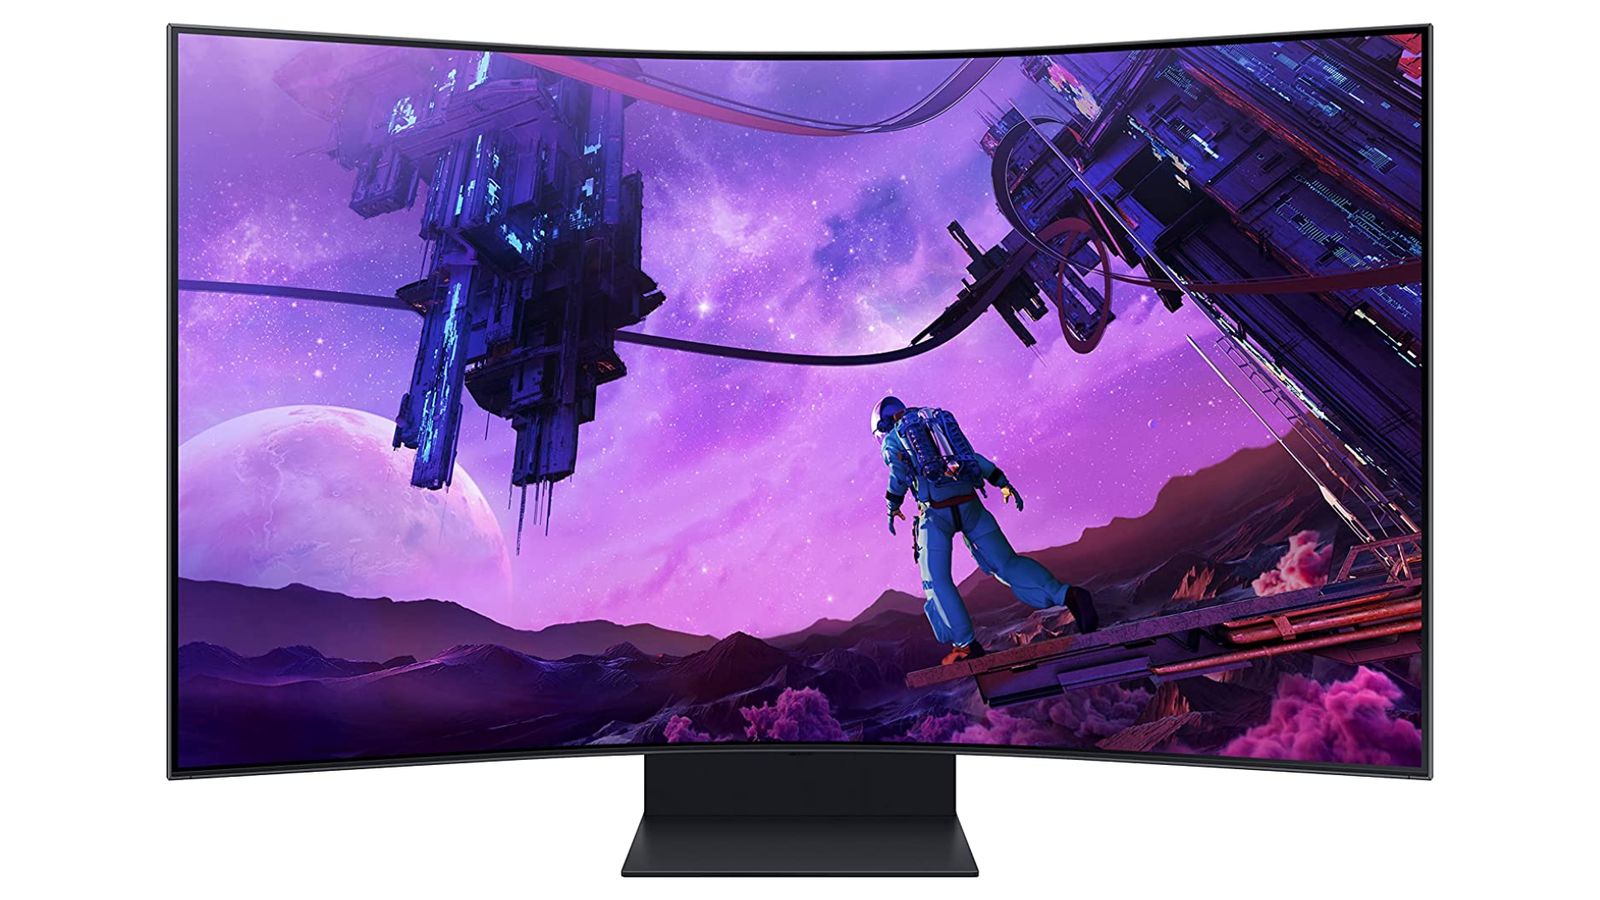 Samsung Odyssey Ark product image of a black monitor featuring a sci-fi space scene of someone in a space suit standing on a planet with a purple sky.